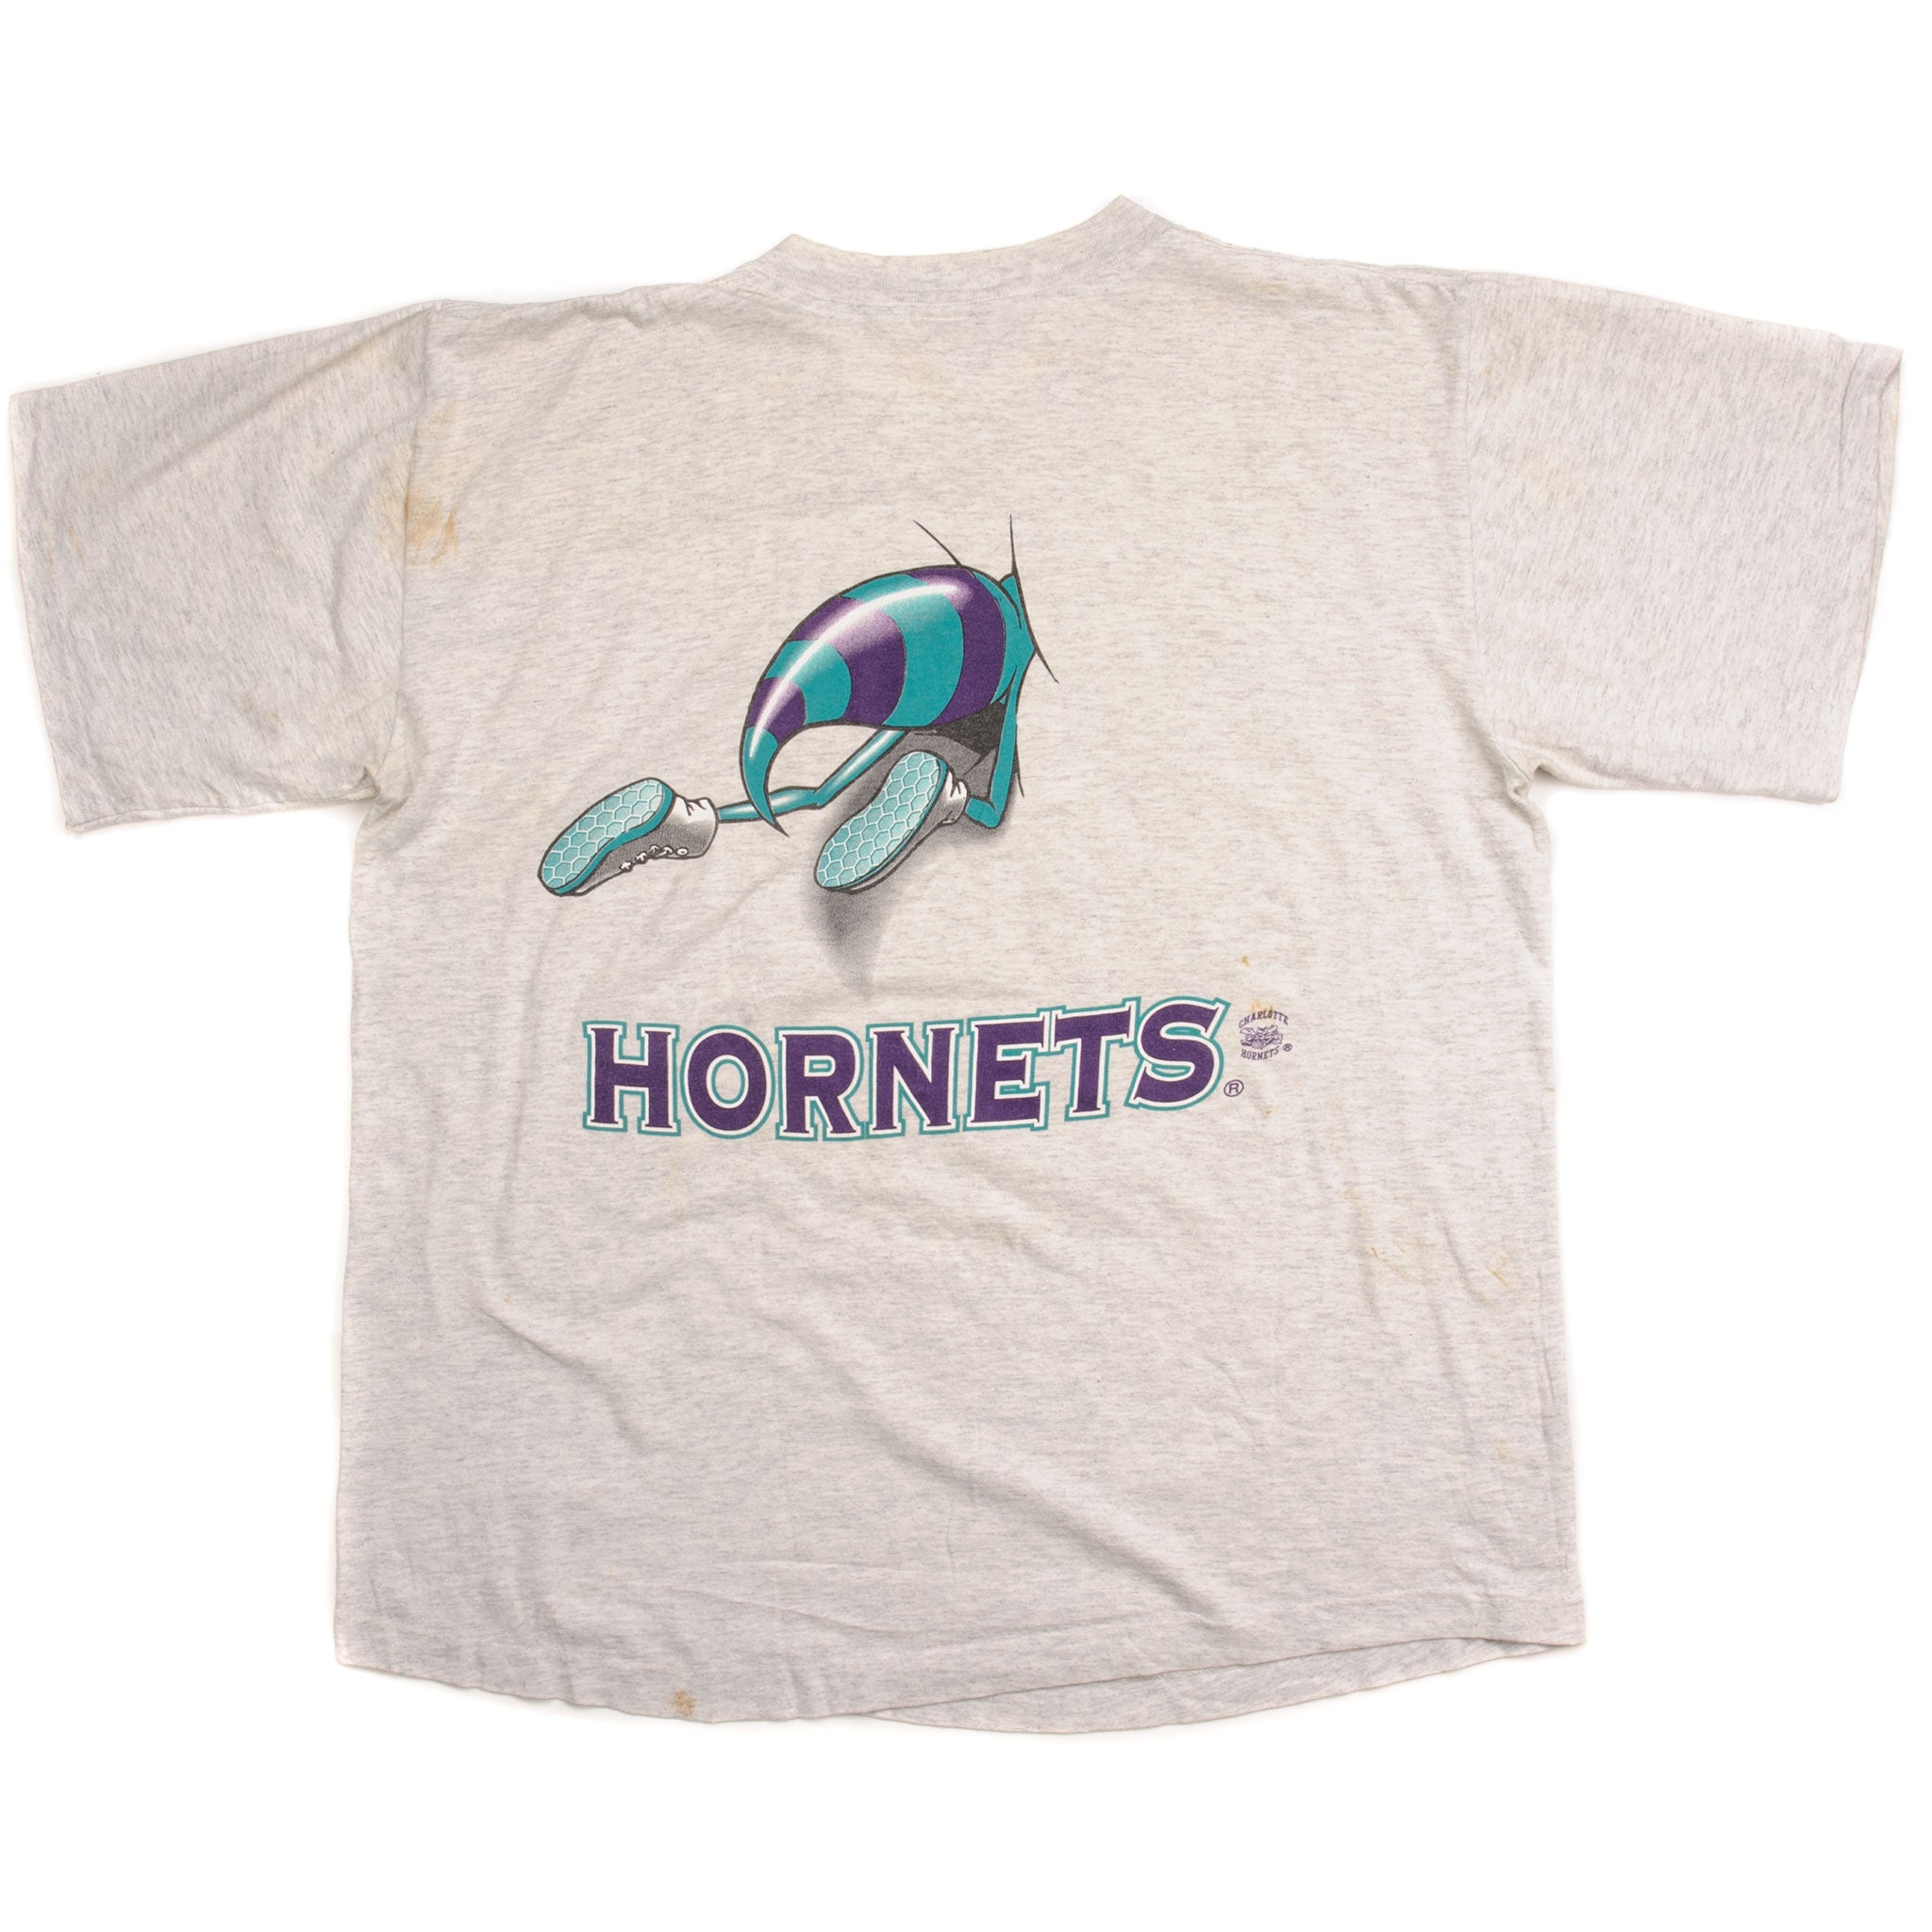 NBA Charlotte Hornets Salem Tee T Shirt Size m Vintage 90's Made In USA 72cm